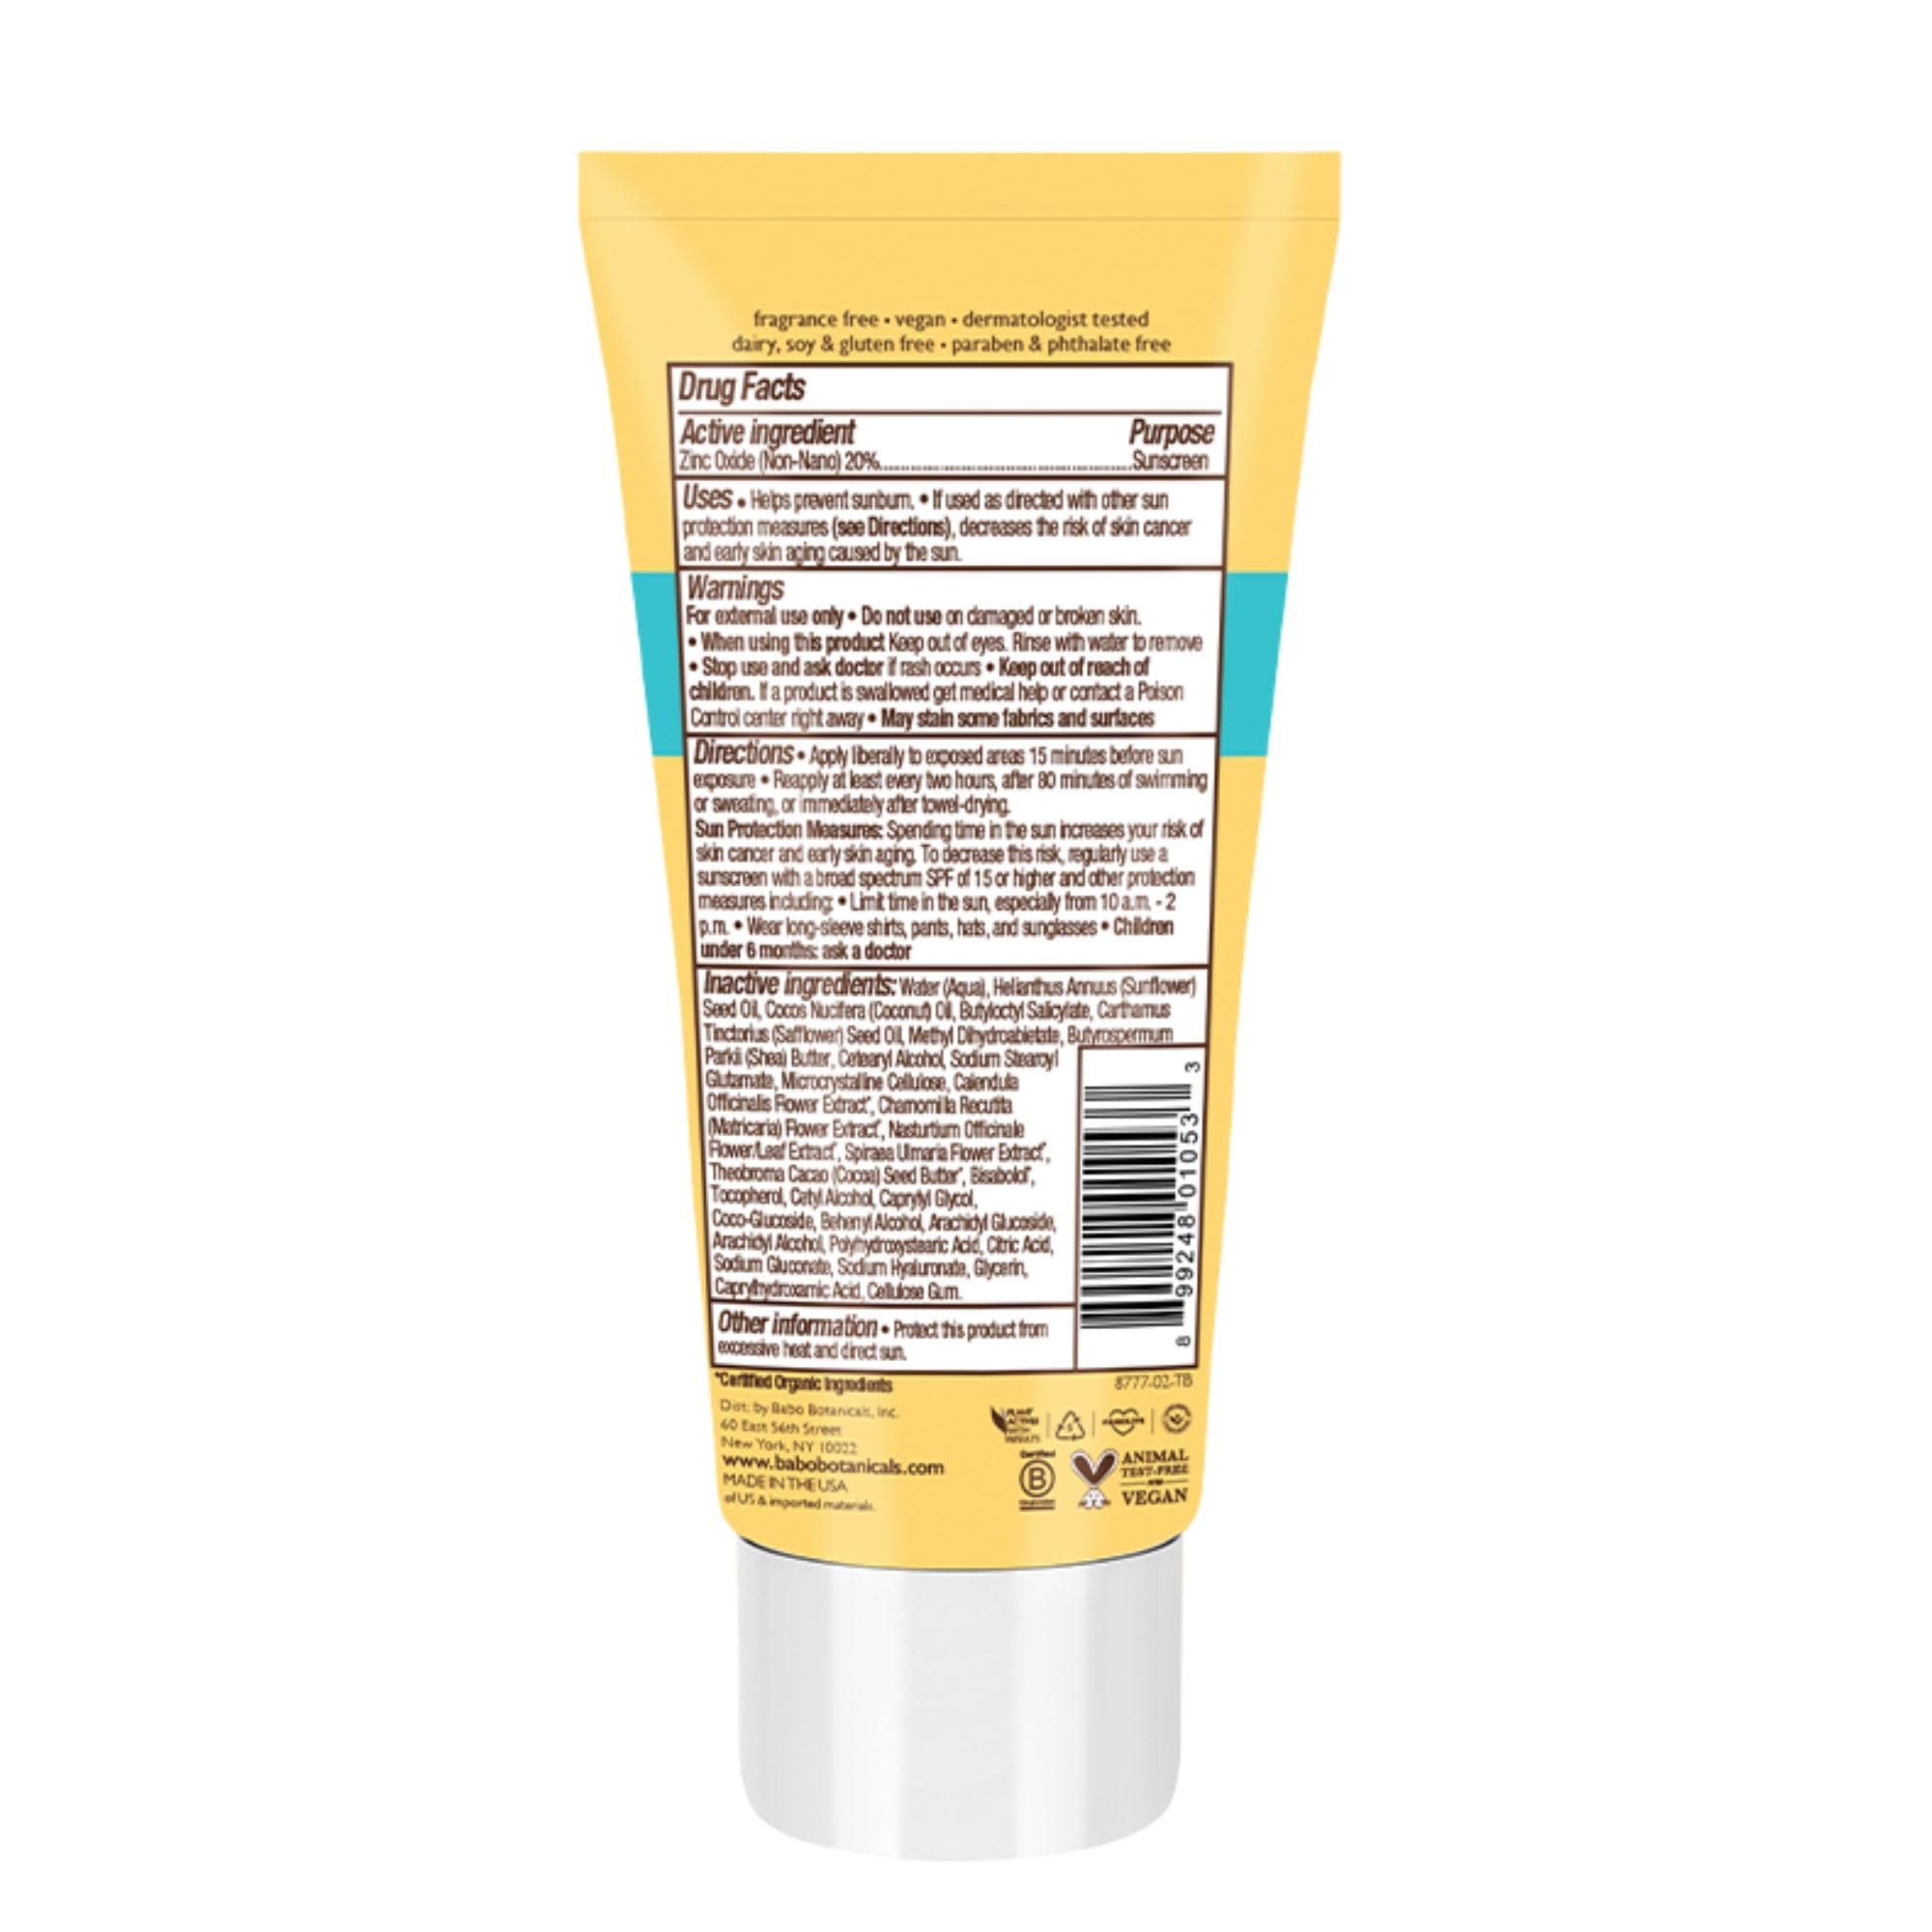 Babo Botanicals Sheer Mineral Sunscreen Lotion SPF 50 with 100% Mineral Active Ingredients - for Babies, Kids or Extra Sensitive Skin - Lightweight, Water Resistant & Fragrance Free - 3 fl. oz.